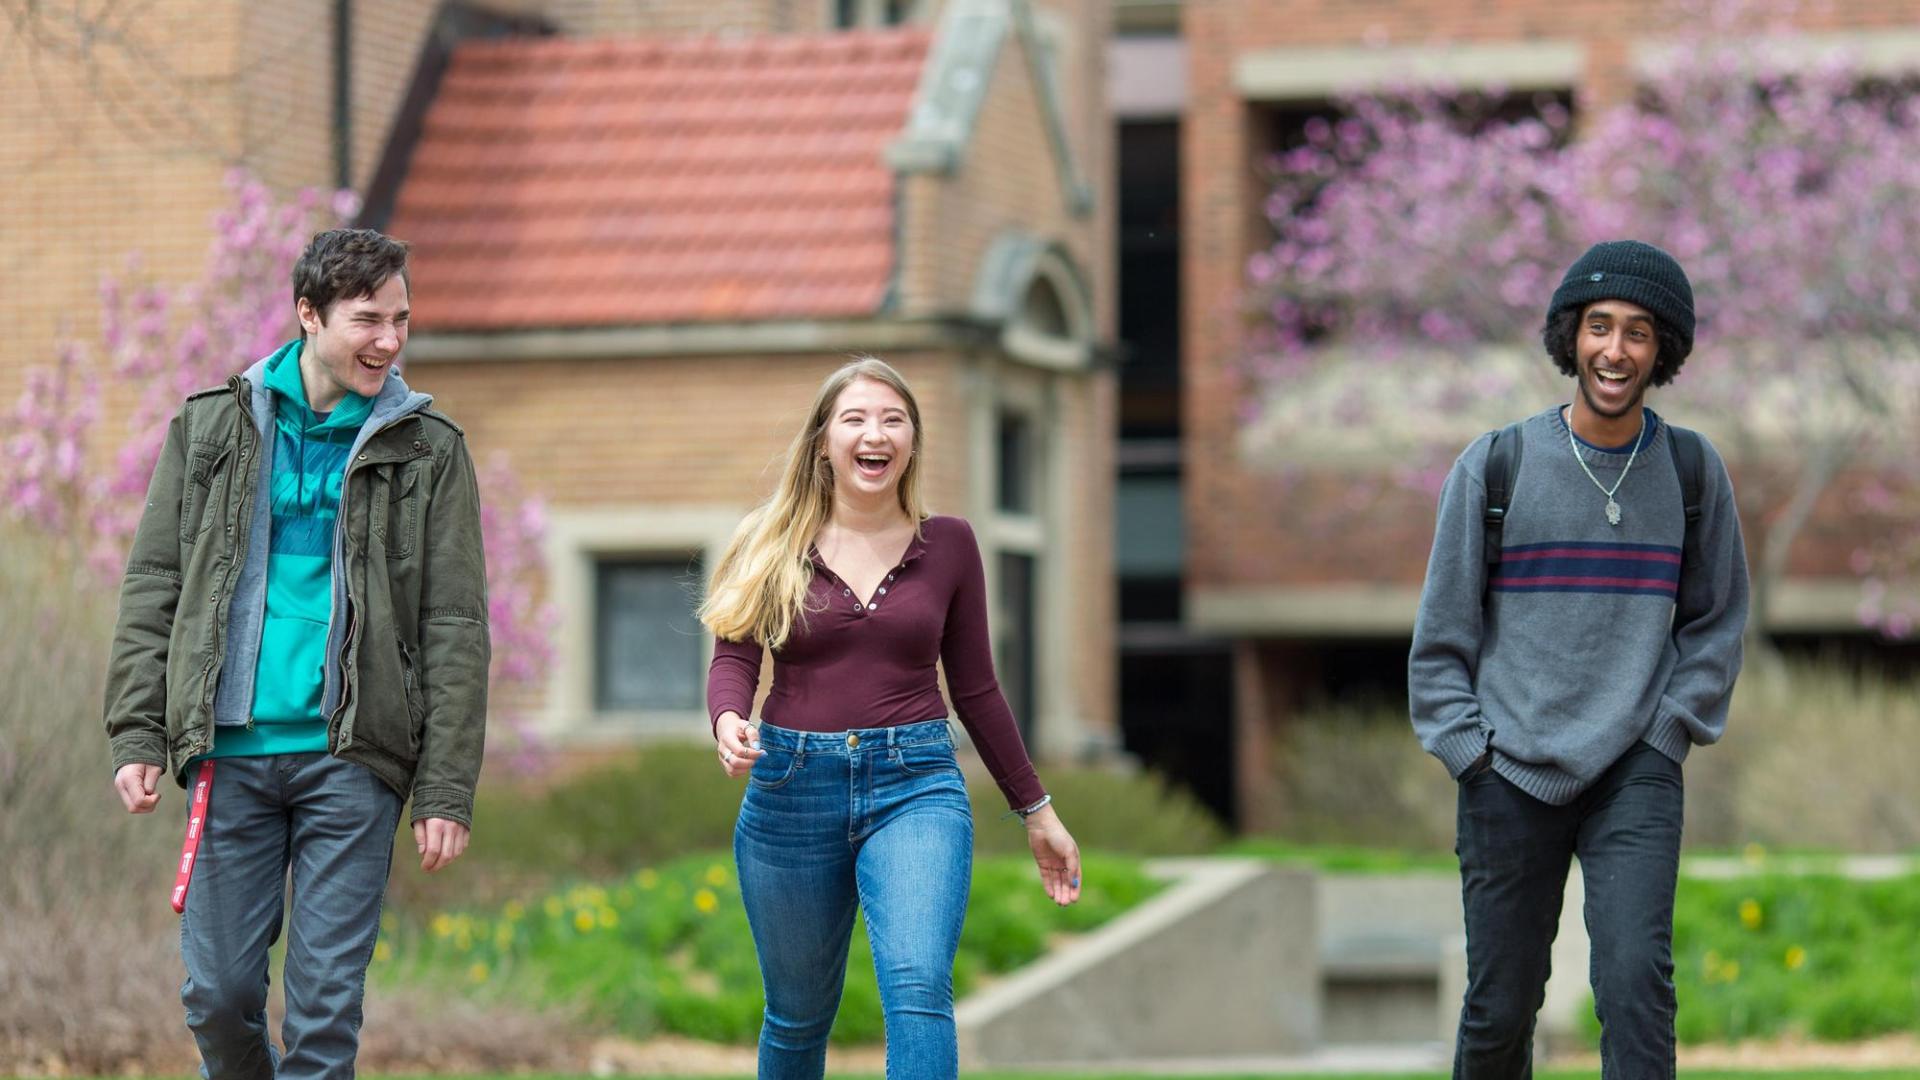 three students walking on  campus in spring, with flowering trees